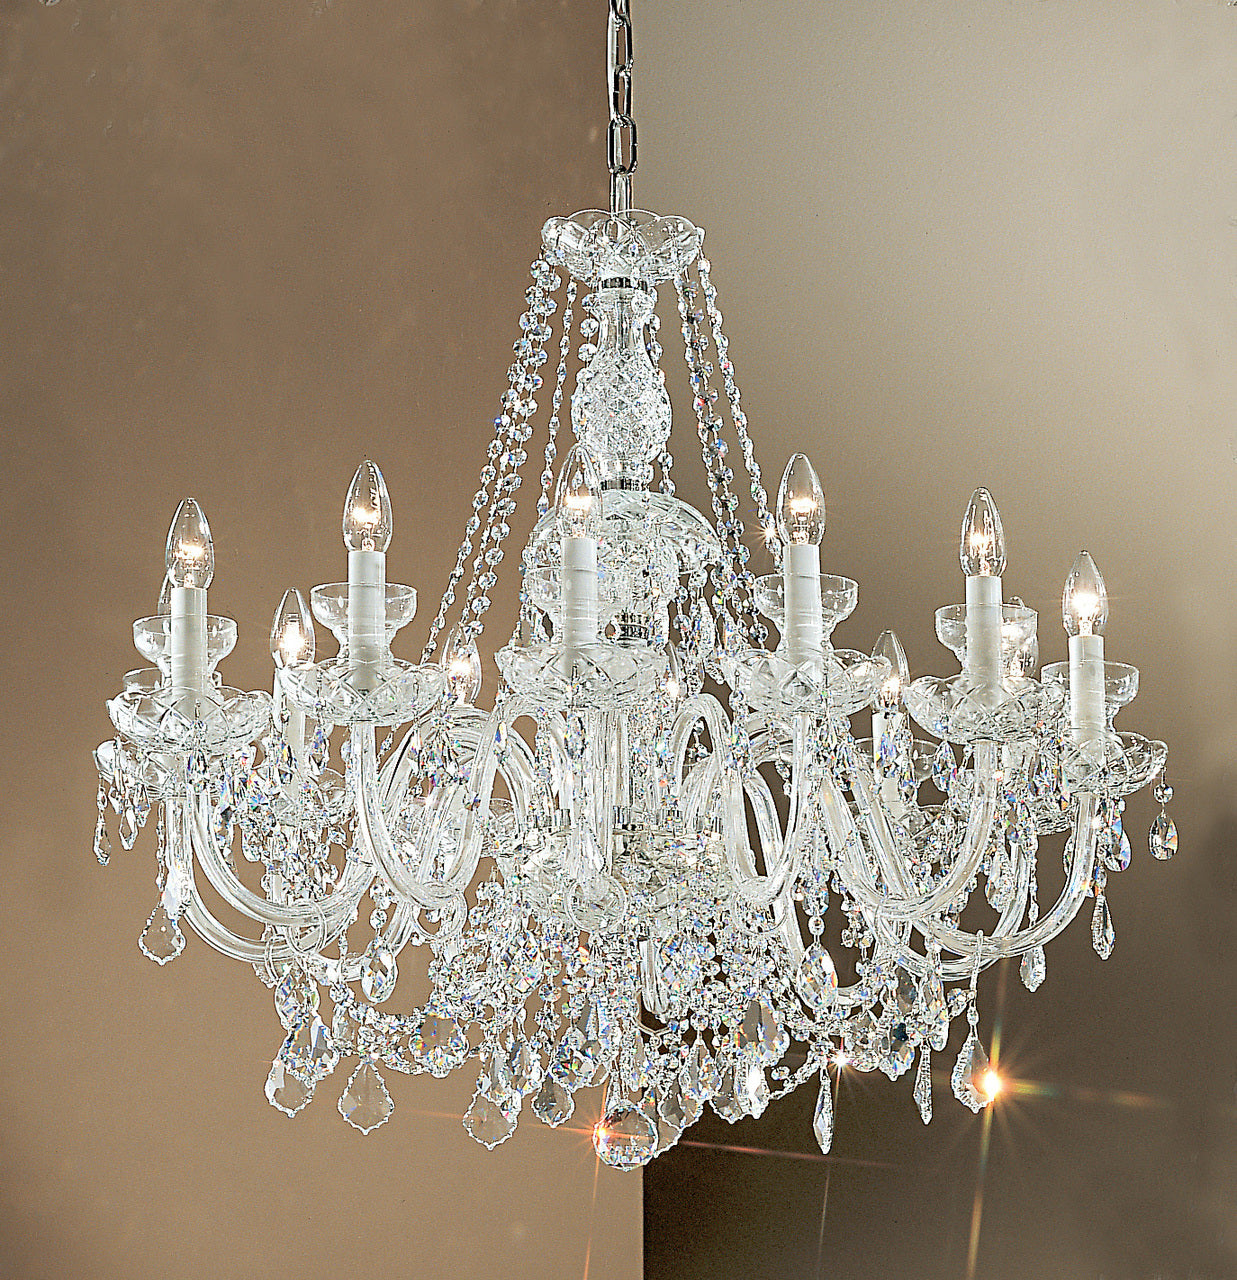 Classic Lighting 8276 G SC Bohemia Crystal/Glass Chandelier in 24k Gold (Imported from Italy)